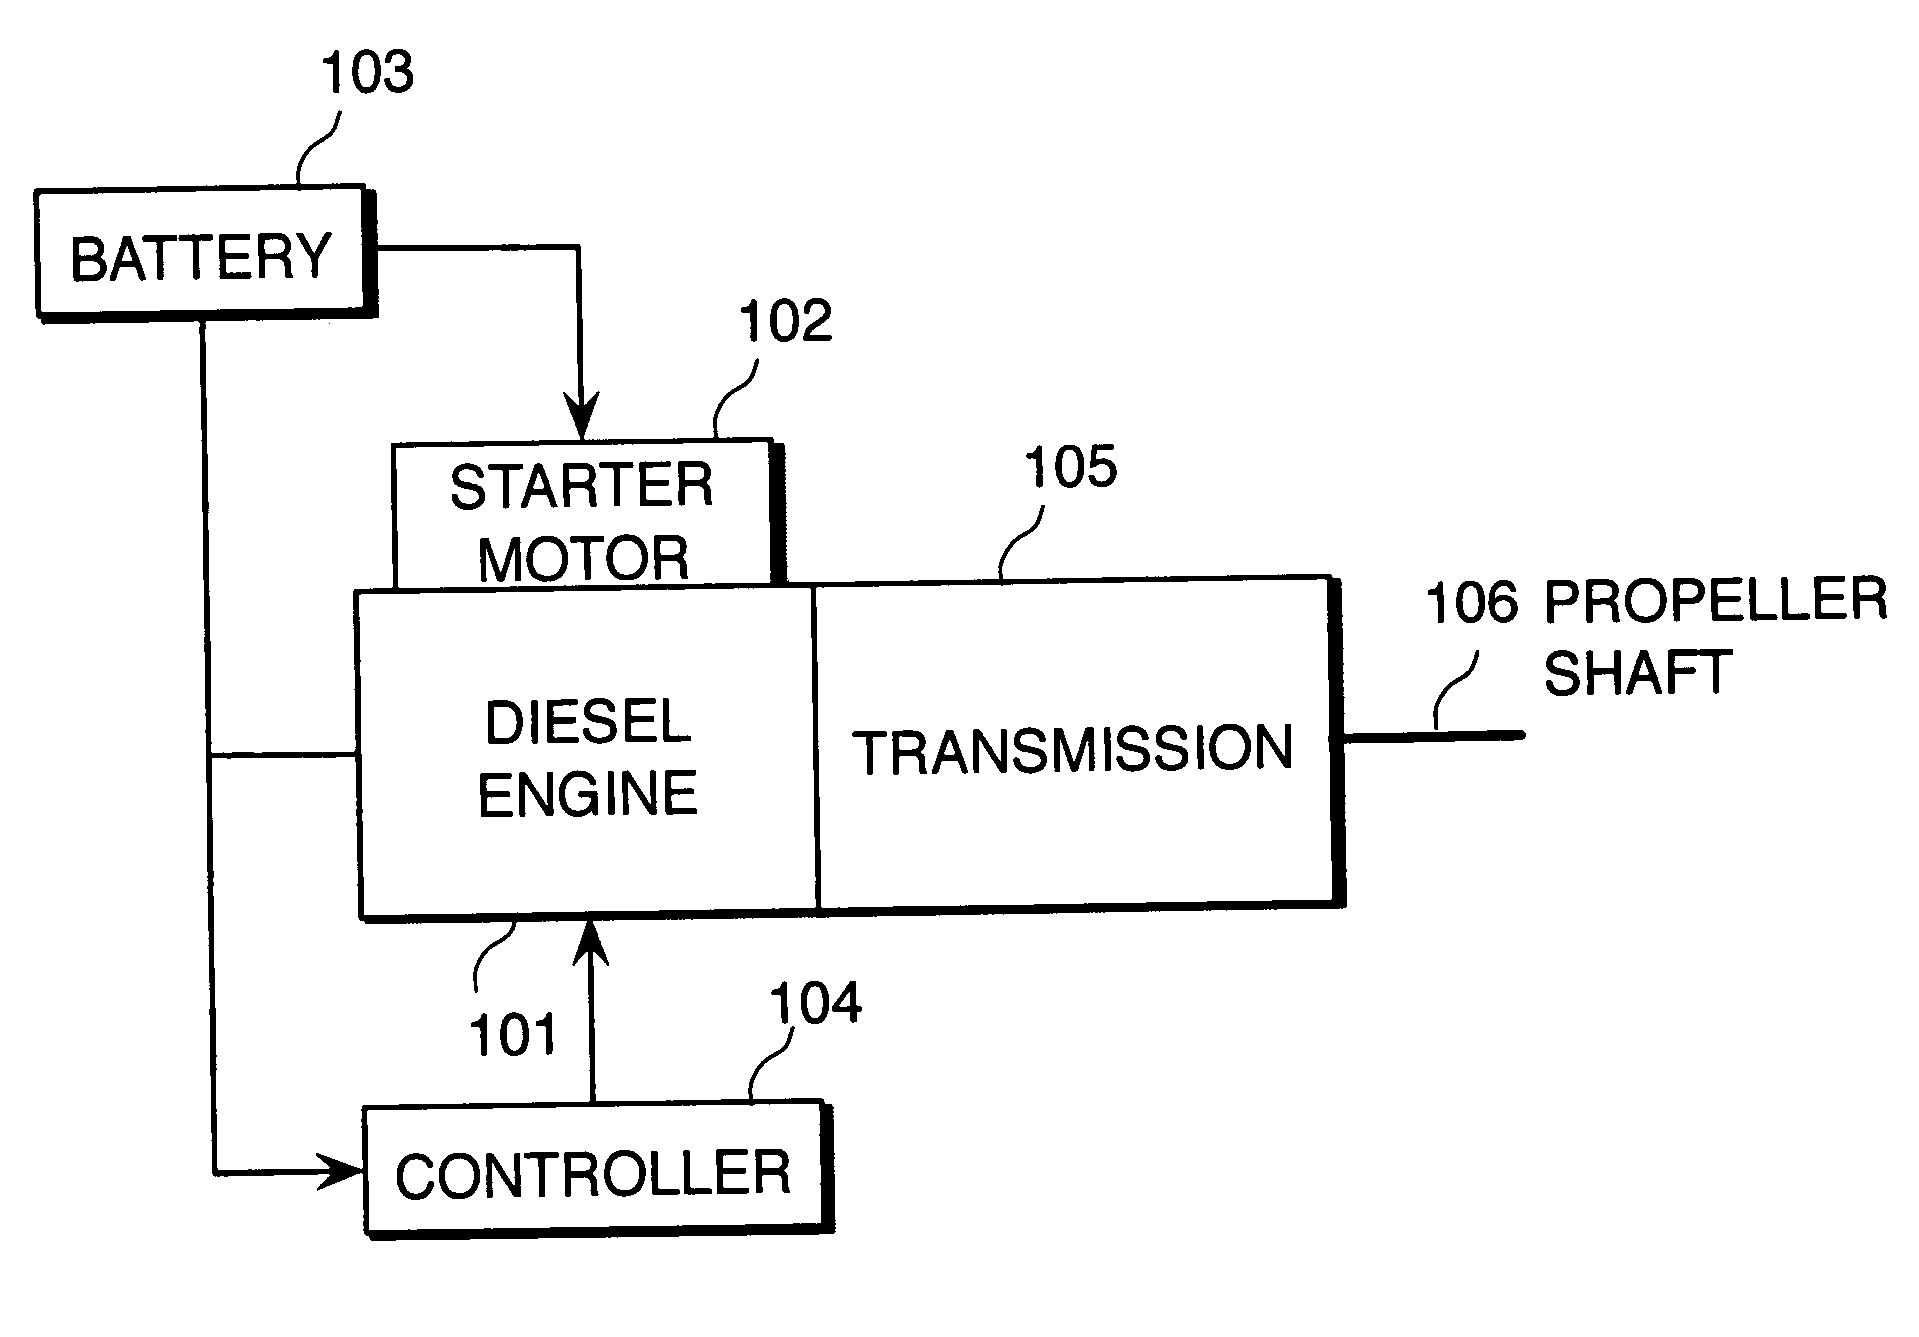 Start-up control for internal combustion engine